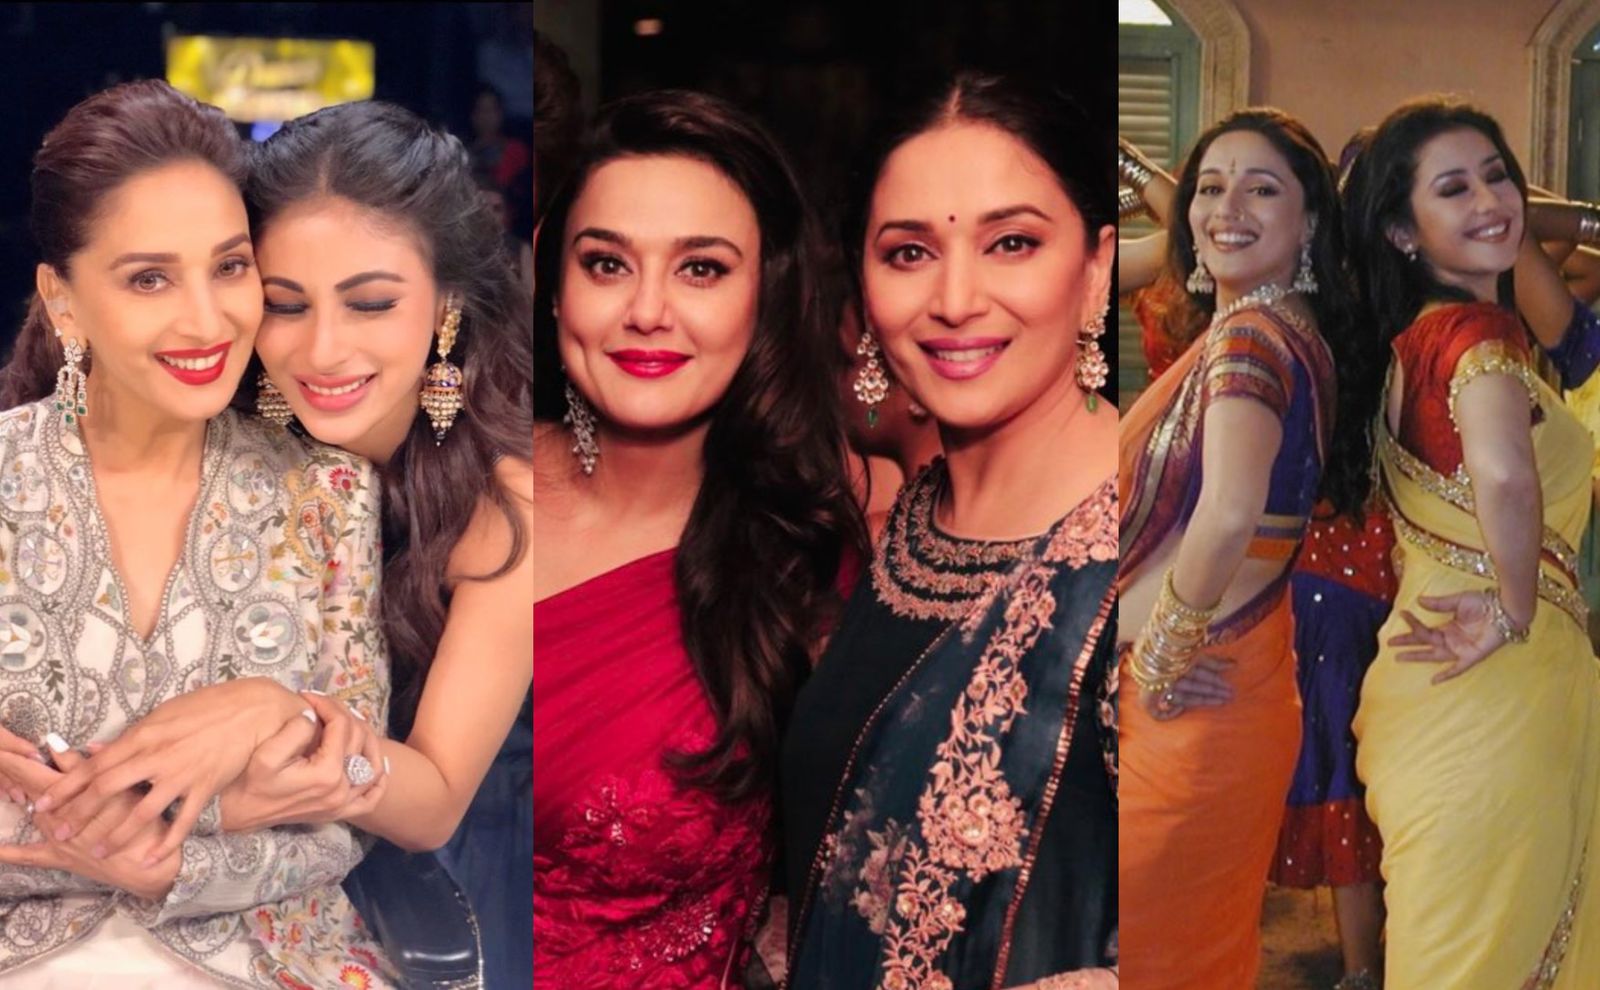 Happy Birthday Madhuri Dixit: Preity Zinta, Mouni Roy And Other Celebs Pour In Wishes For The Queen Of Hearts